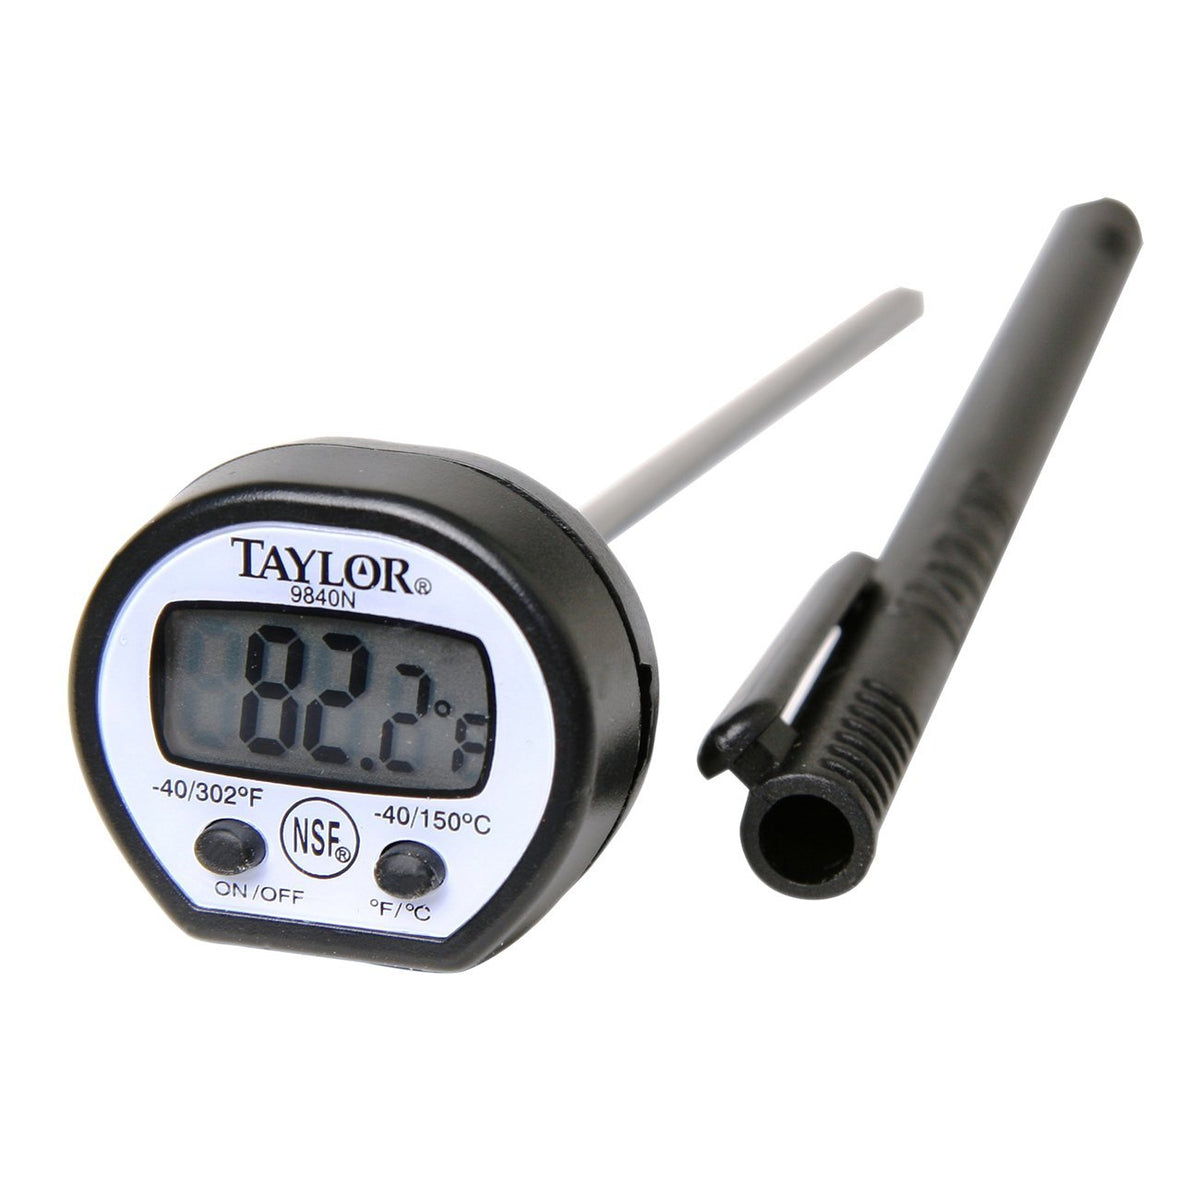 Taylor Instant Read Pocket Kitchen Thermometer